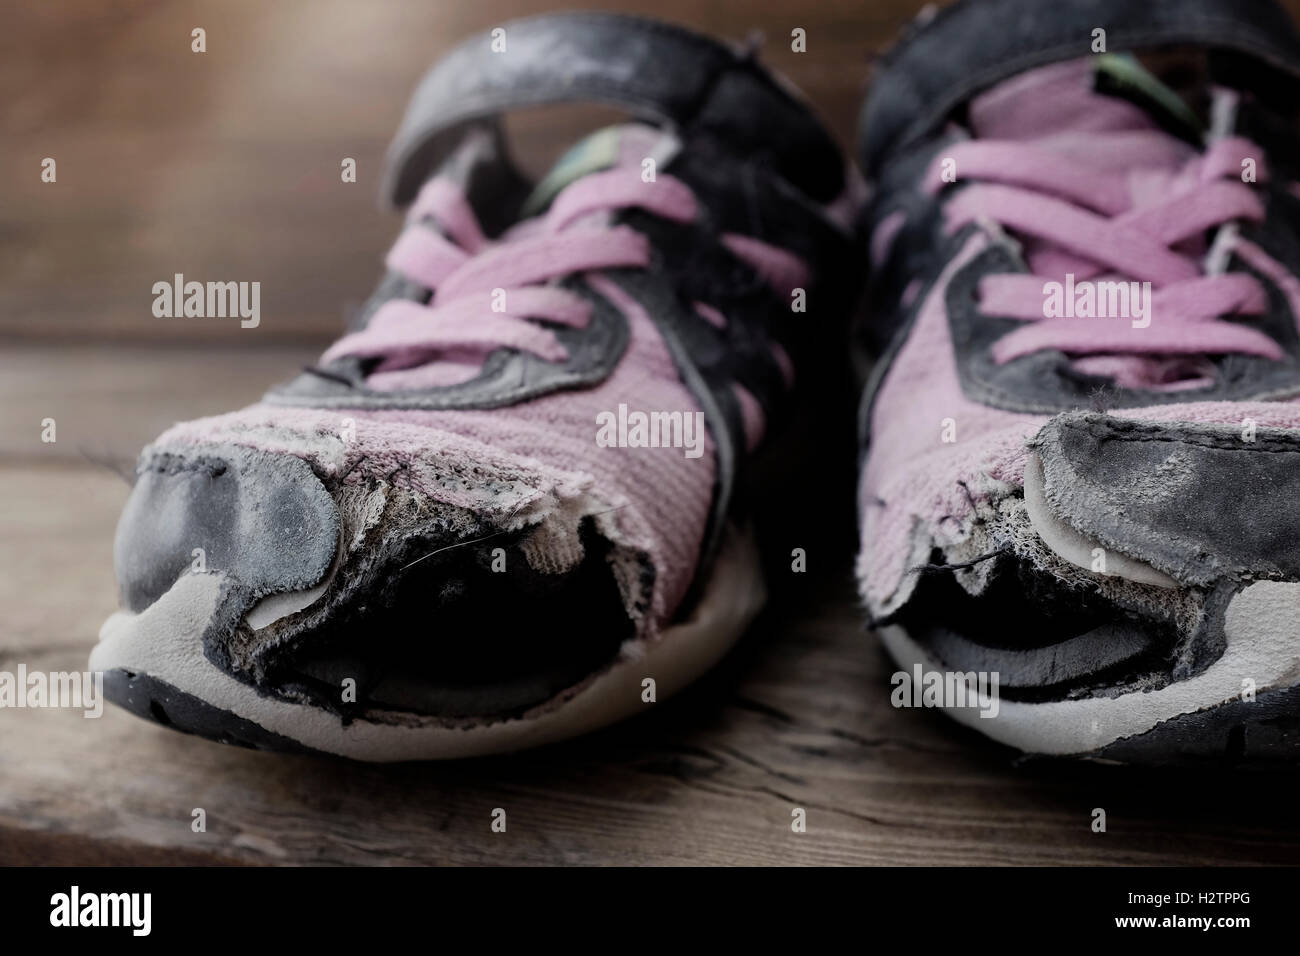 Old shoes with holes worn down shabby for homeless clothing Stock Photo